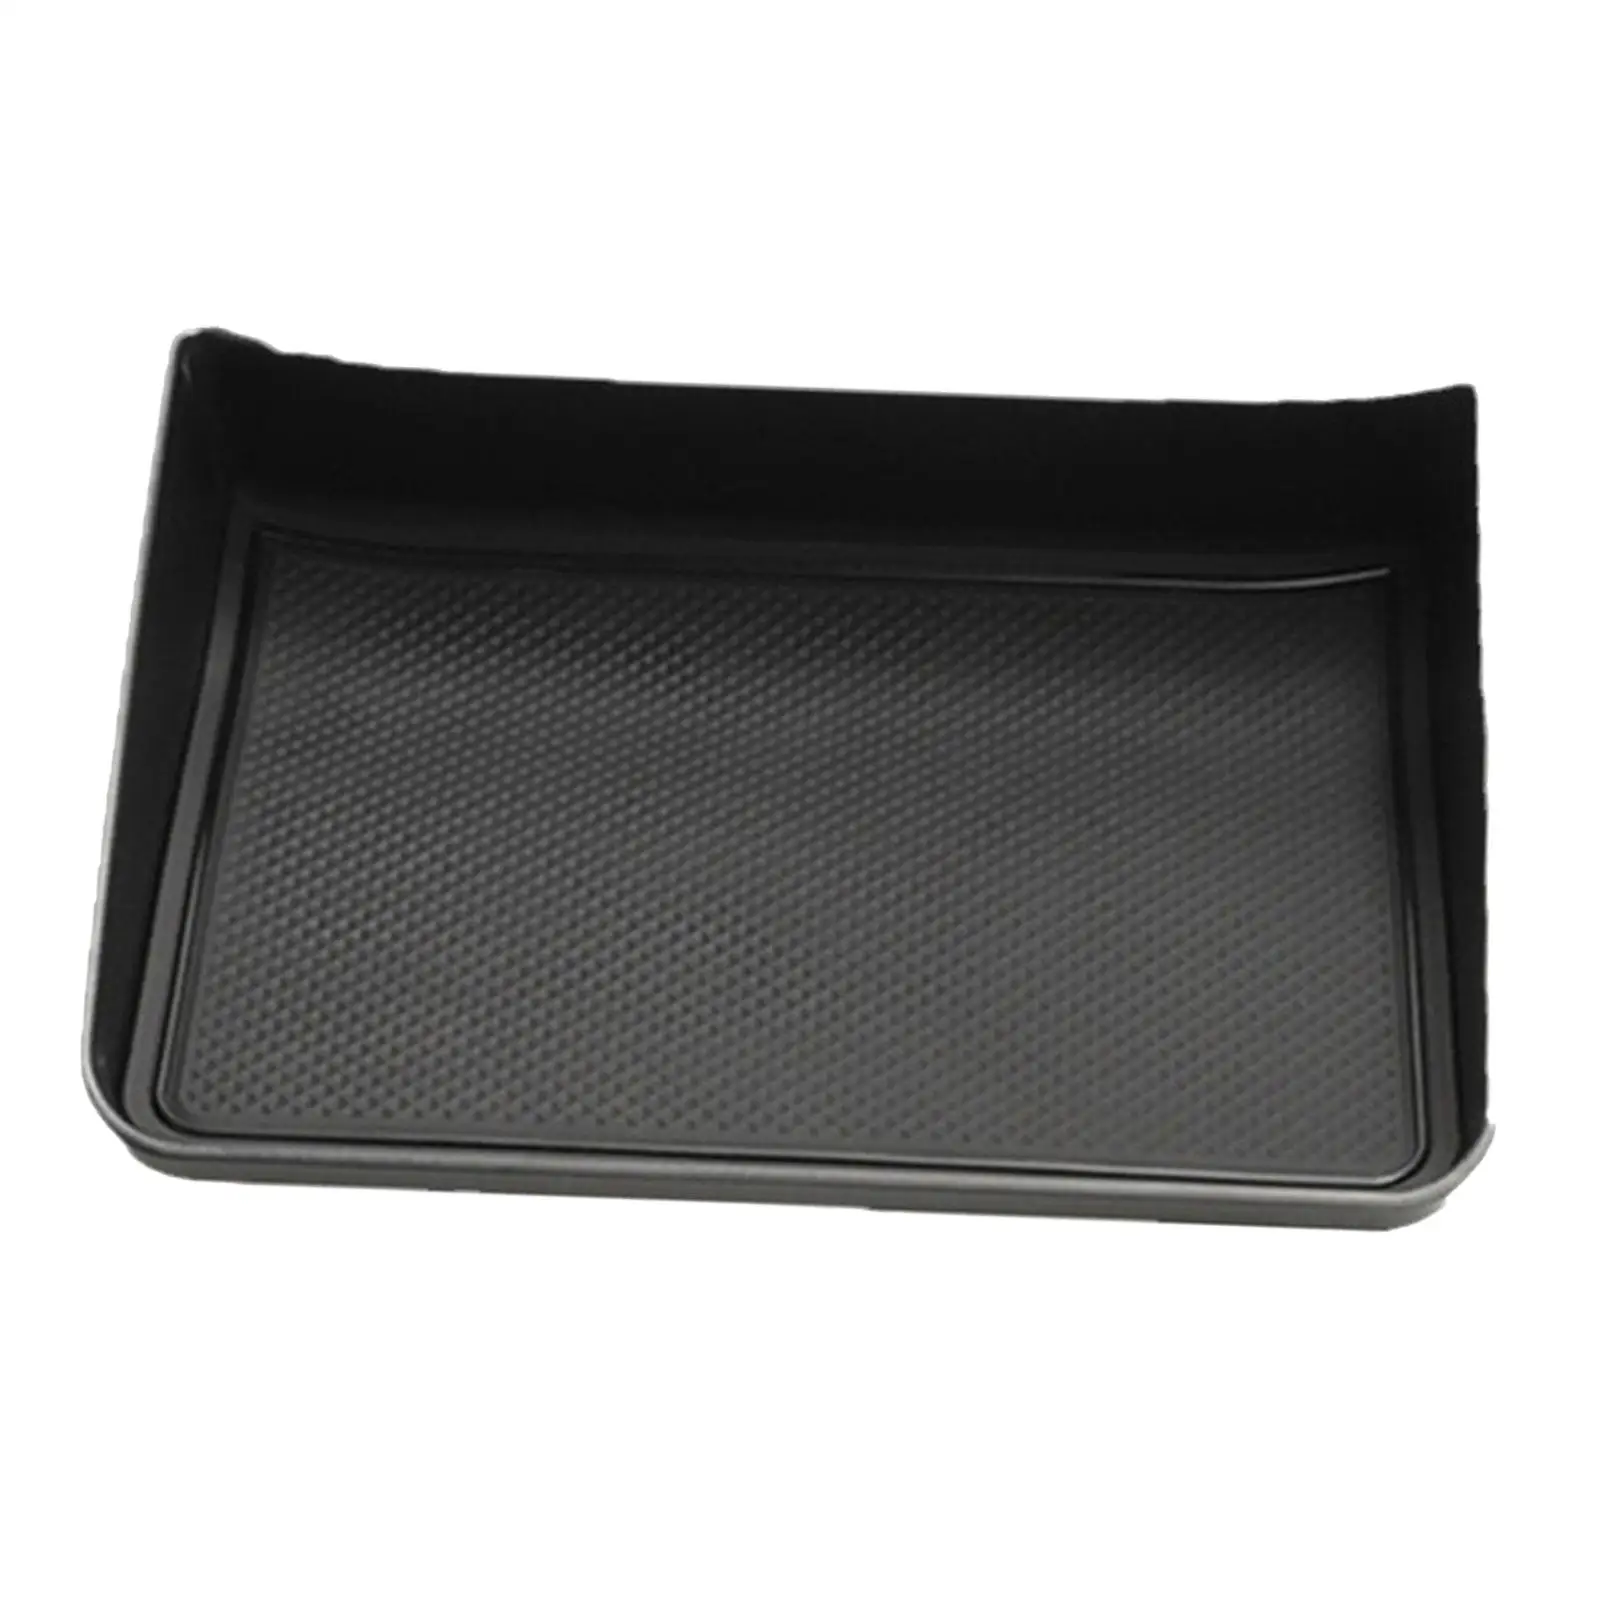 Dashboard Organizer Interior Accessories Professional Anti Slip Durable Replaces Assembly Car Tissue Holder for Toyota bz3